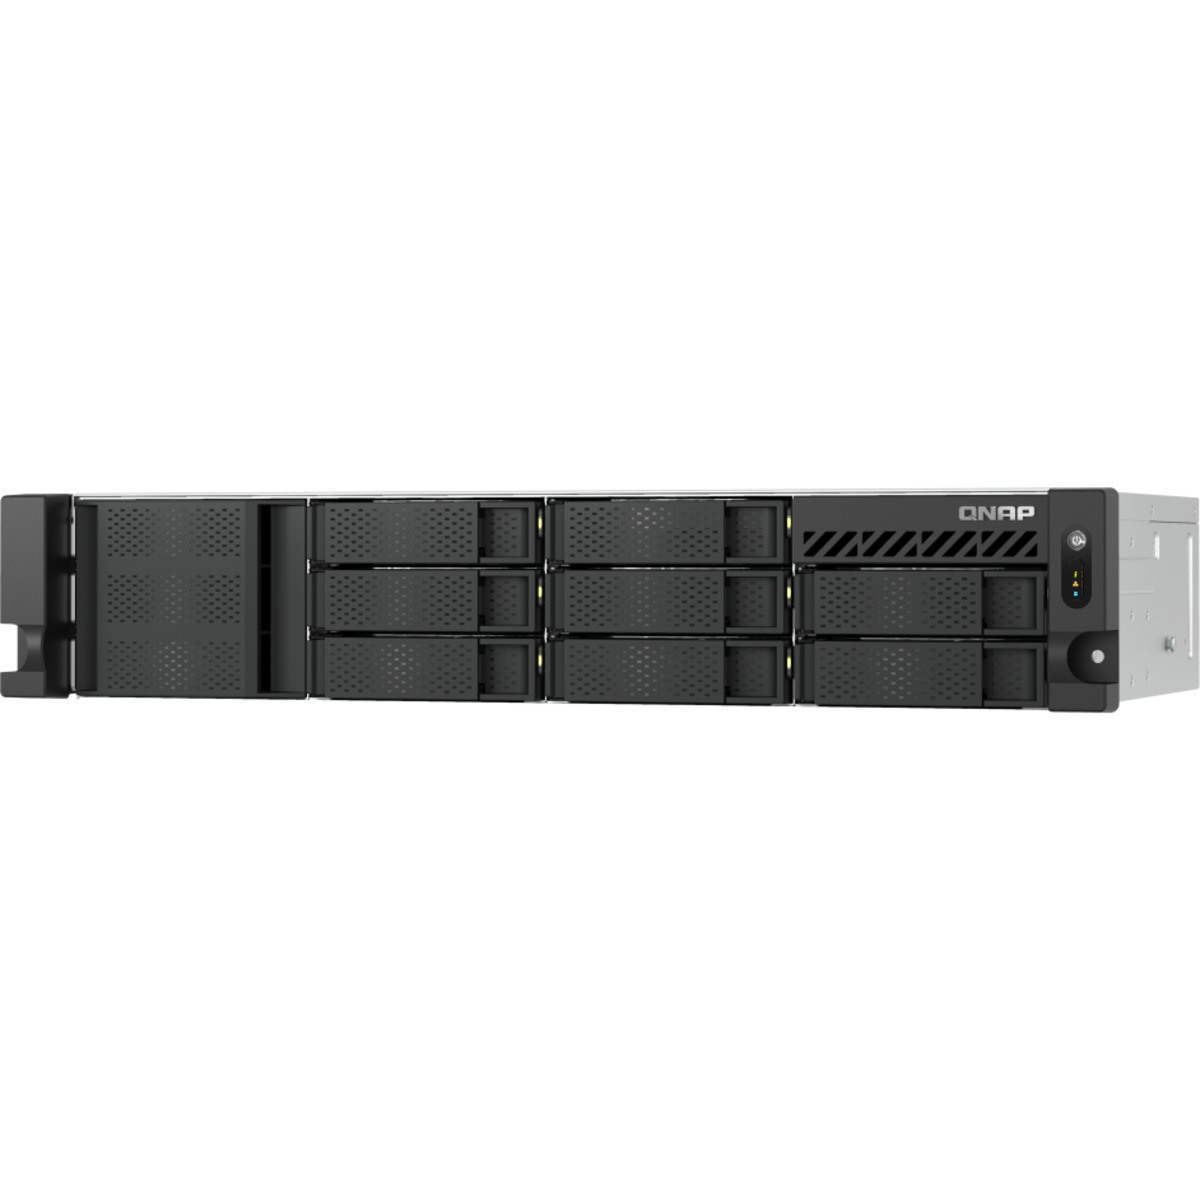 QNAP TS-855eU-RP 154tb 8-Bay RackMount Multimedia / Power User / Business NAS - Network Attached Storage Device 7x22tb Seagate EXOS X22 ST22000NM001E 3.5 7200rpm SATA 6Gb/s HDD ENTERPRISE Class Drives Installed - Burn-In Tested - FREE RAM UPGRADE TS-855eU-RP